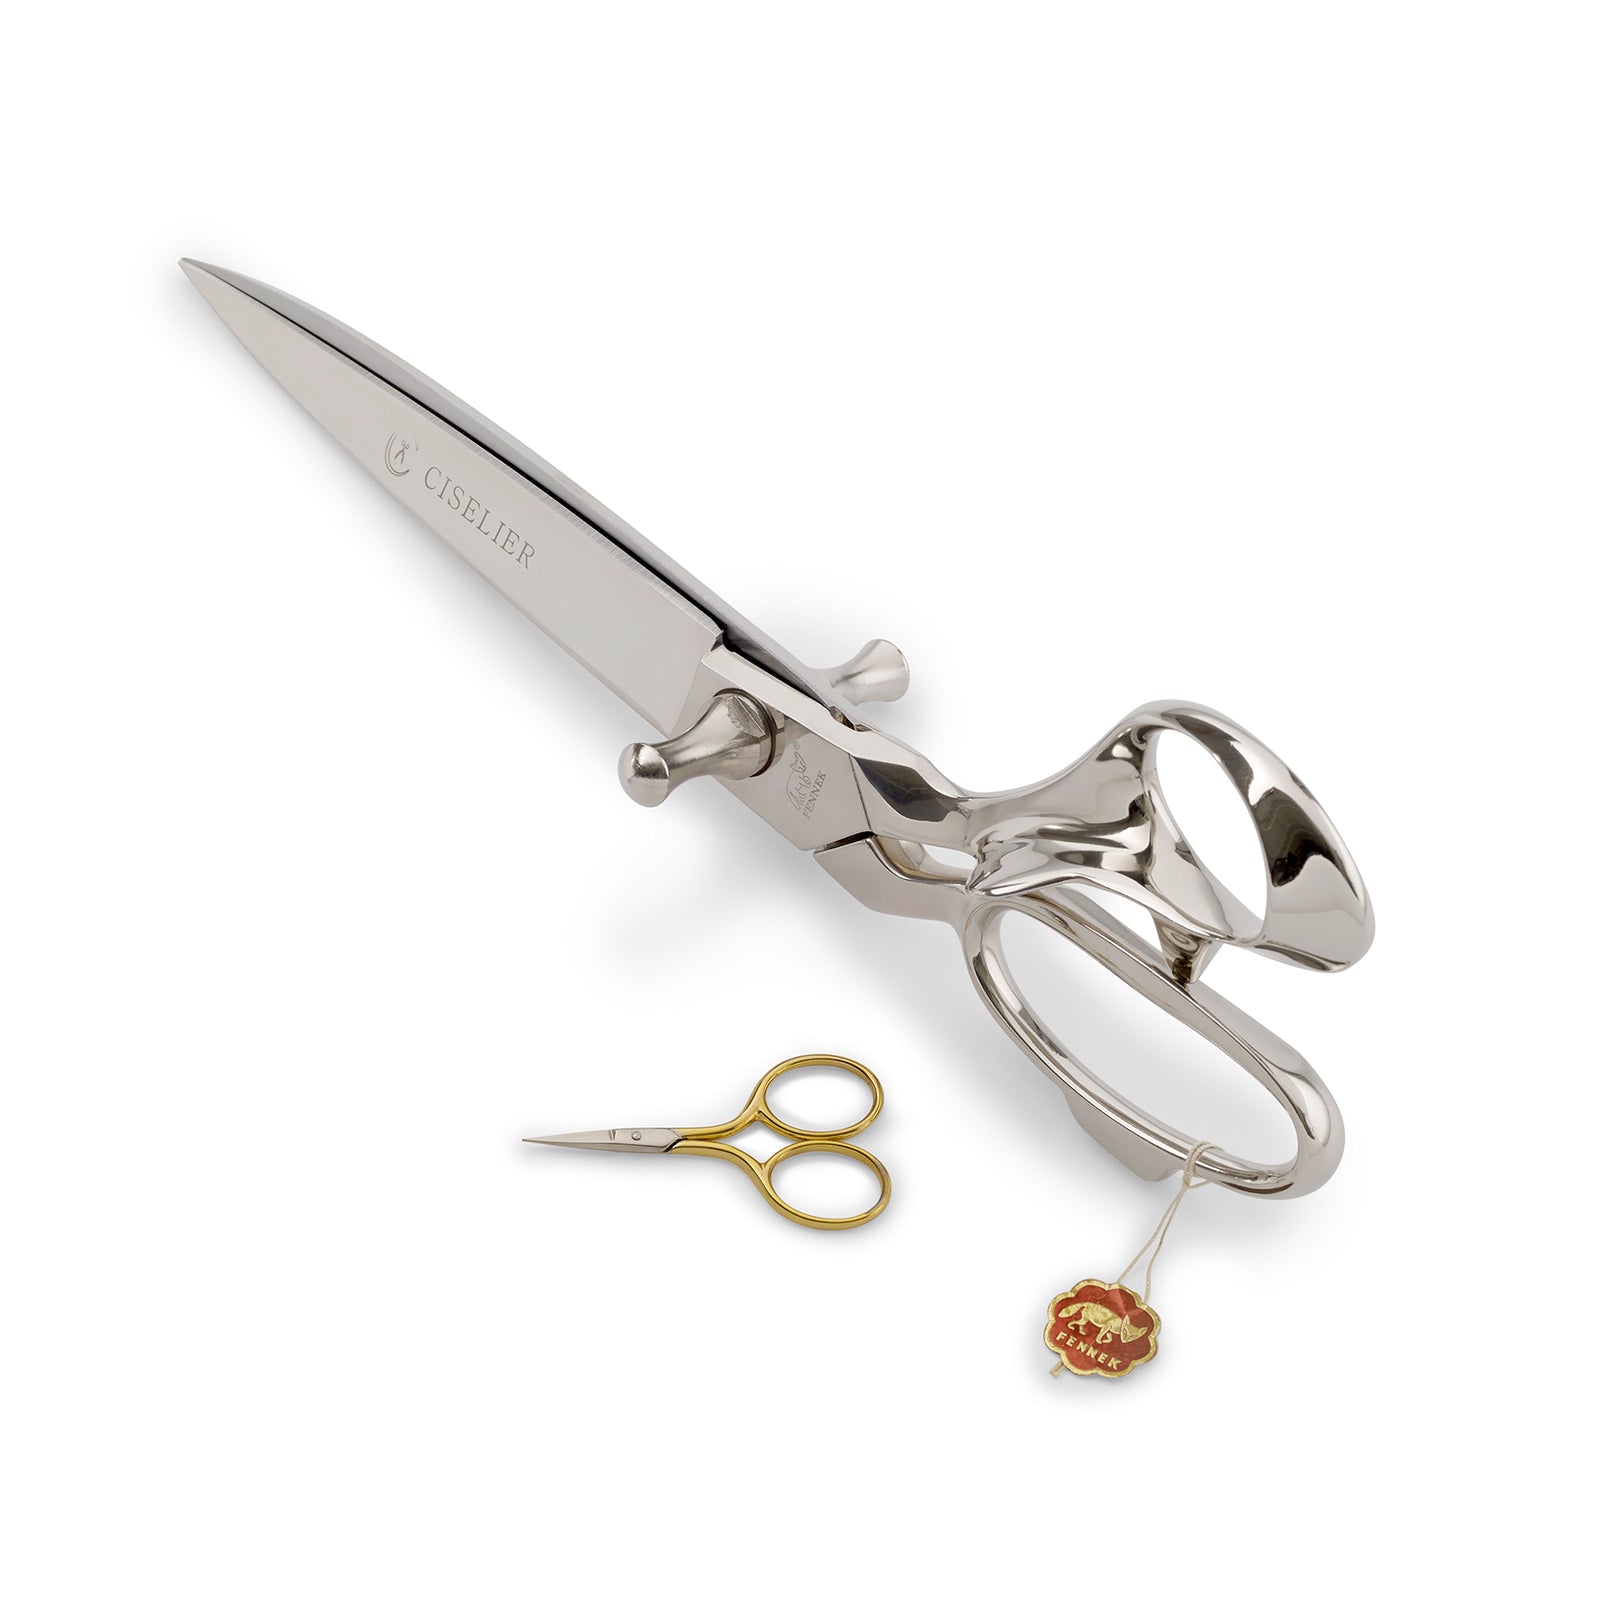 left handed fabric scissors (ordered on !!) : r/sewing